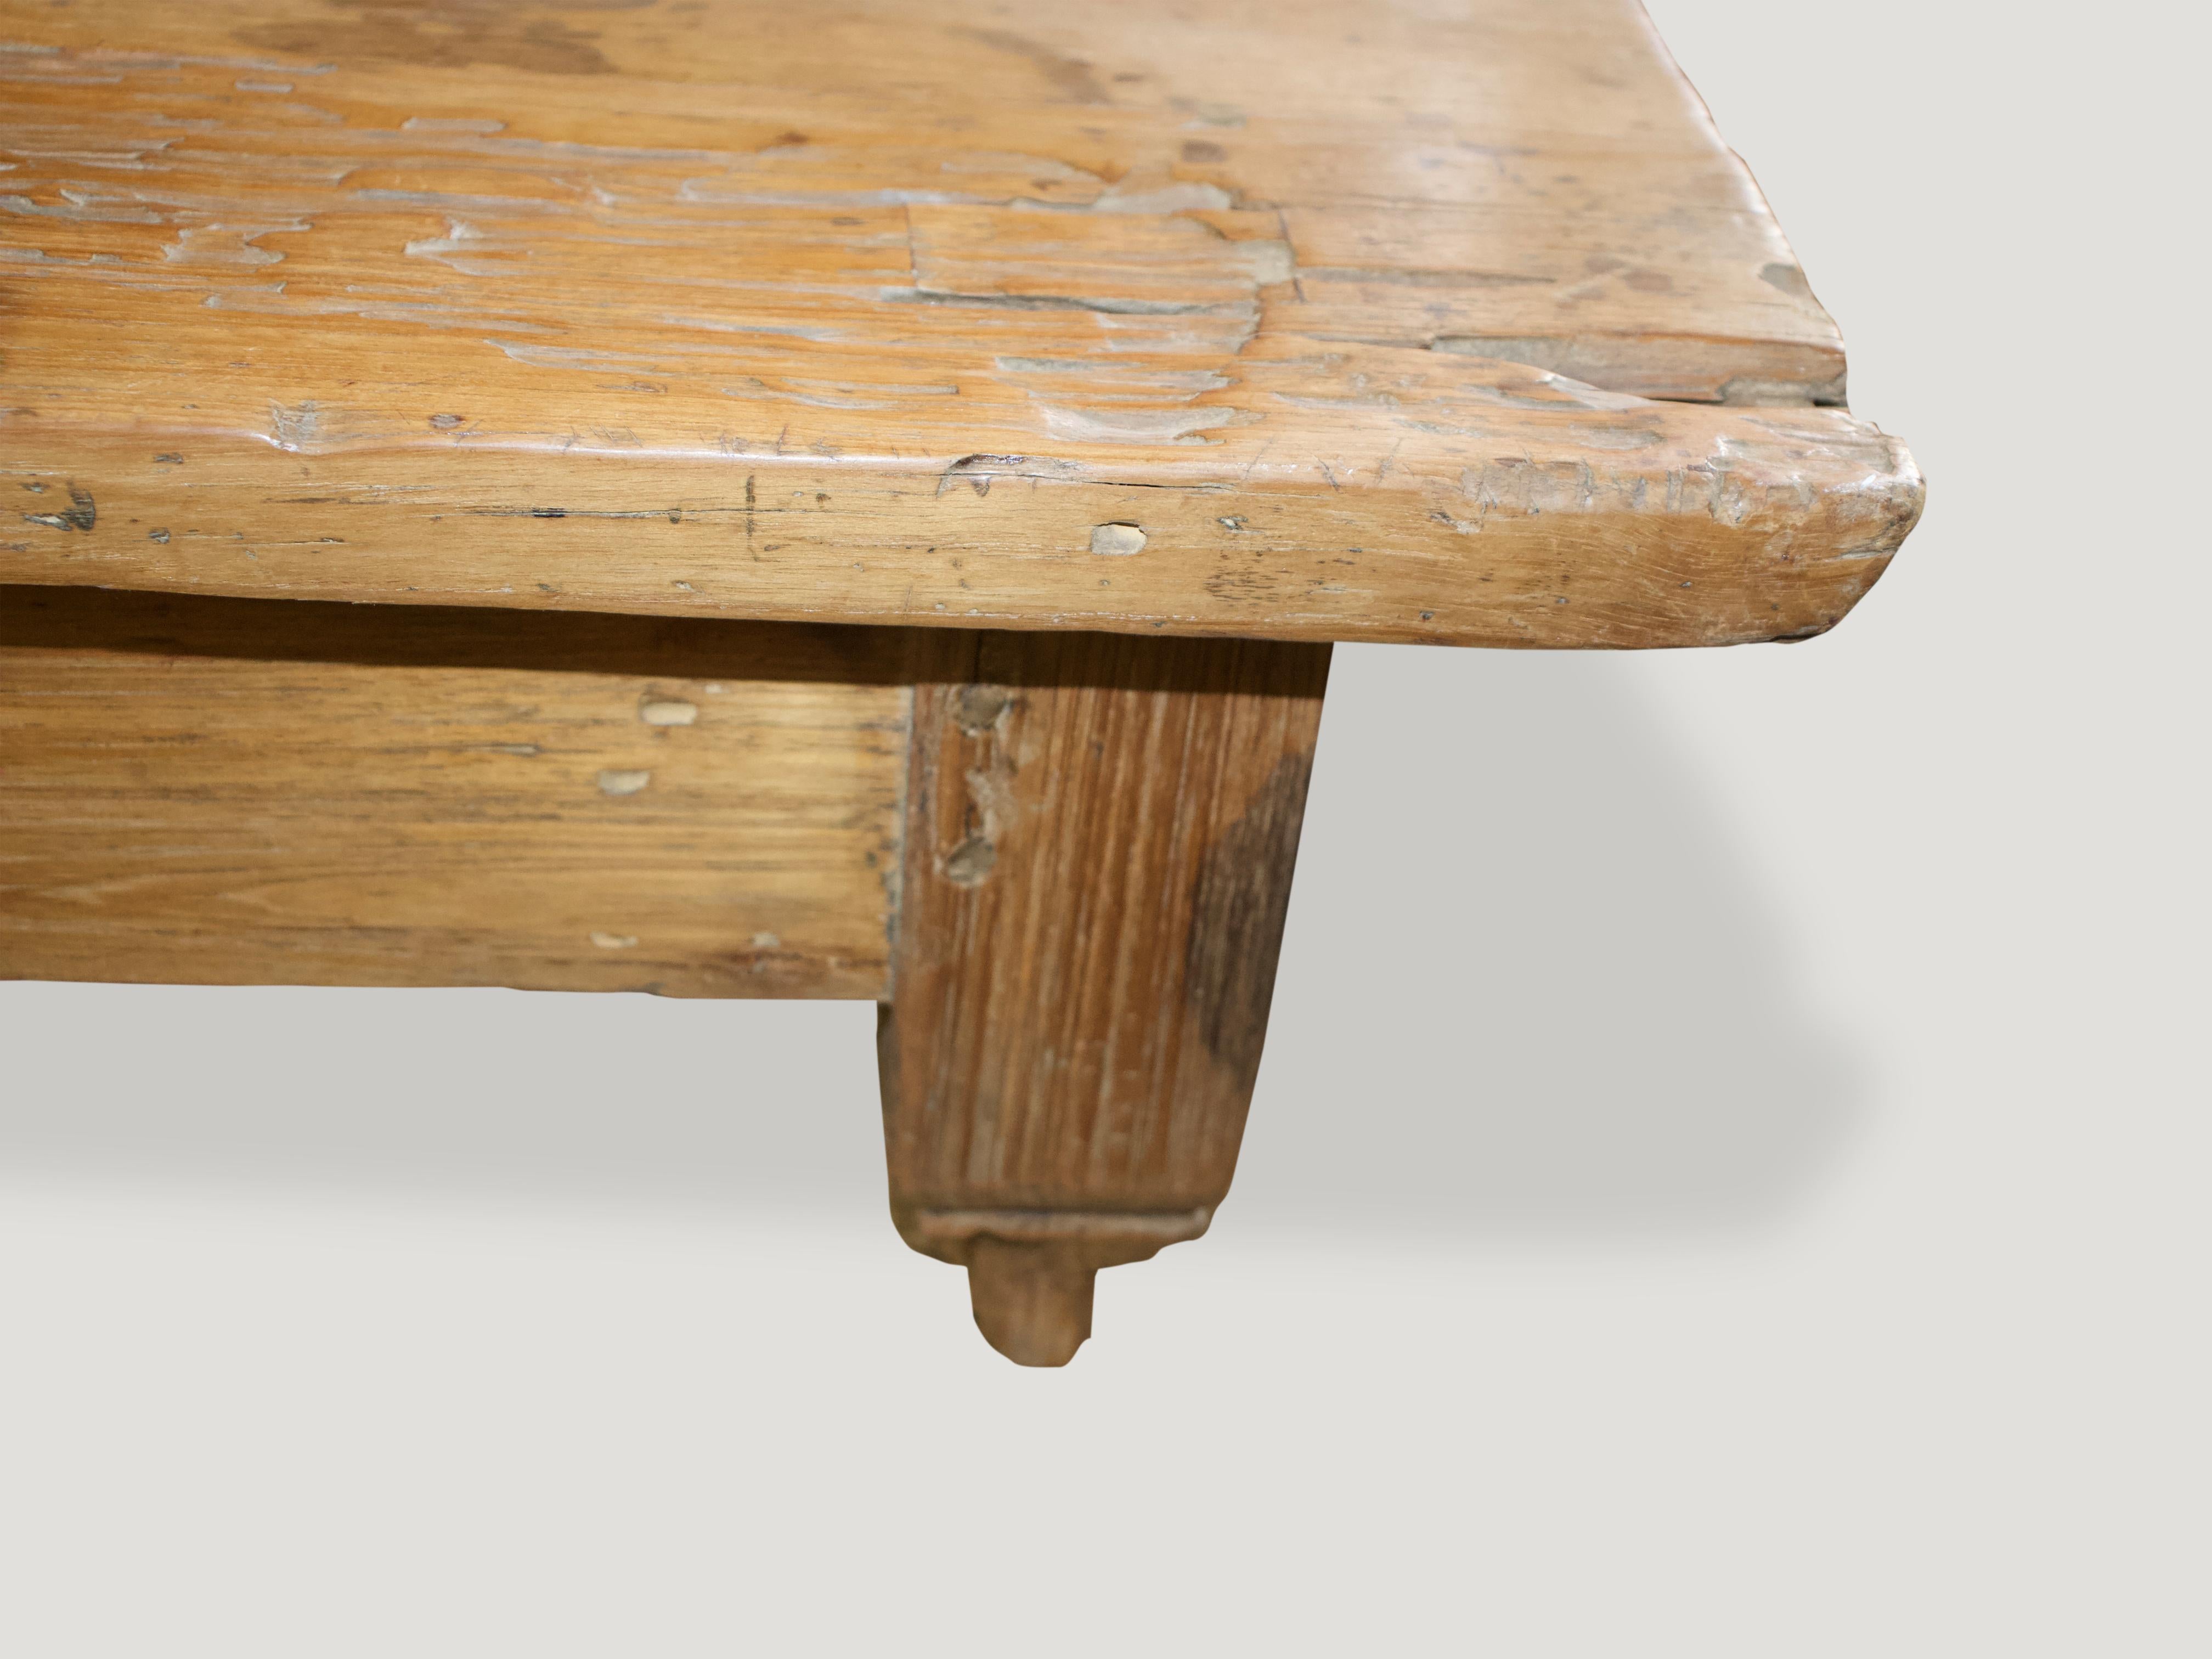 Antique coffee table with a single drawer and the top made from a single slab of natural aged teak. This low profile coffee table celebrates cracks and crevices and all the other marks that time and loving use have left behind.

This table was